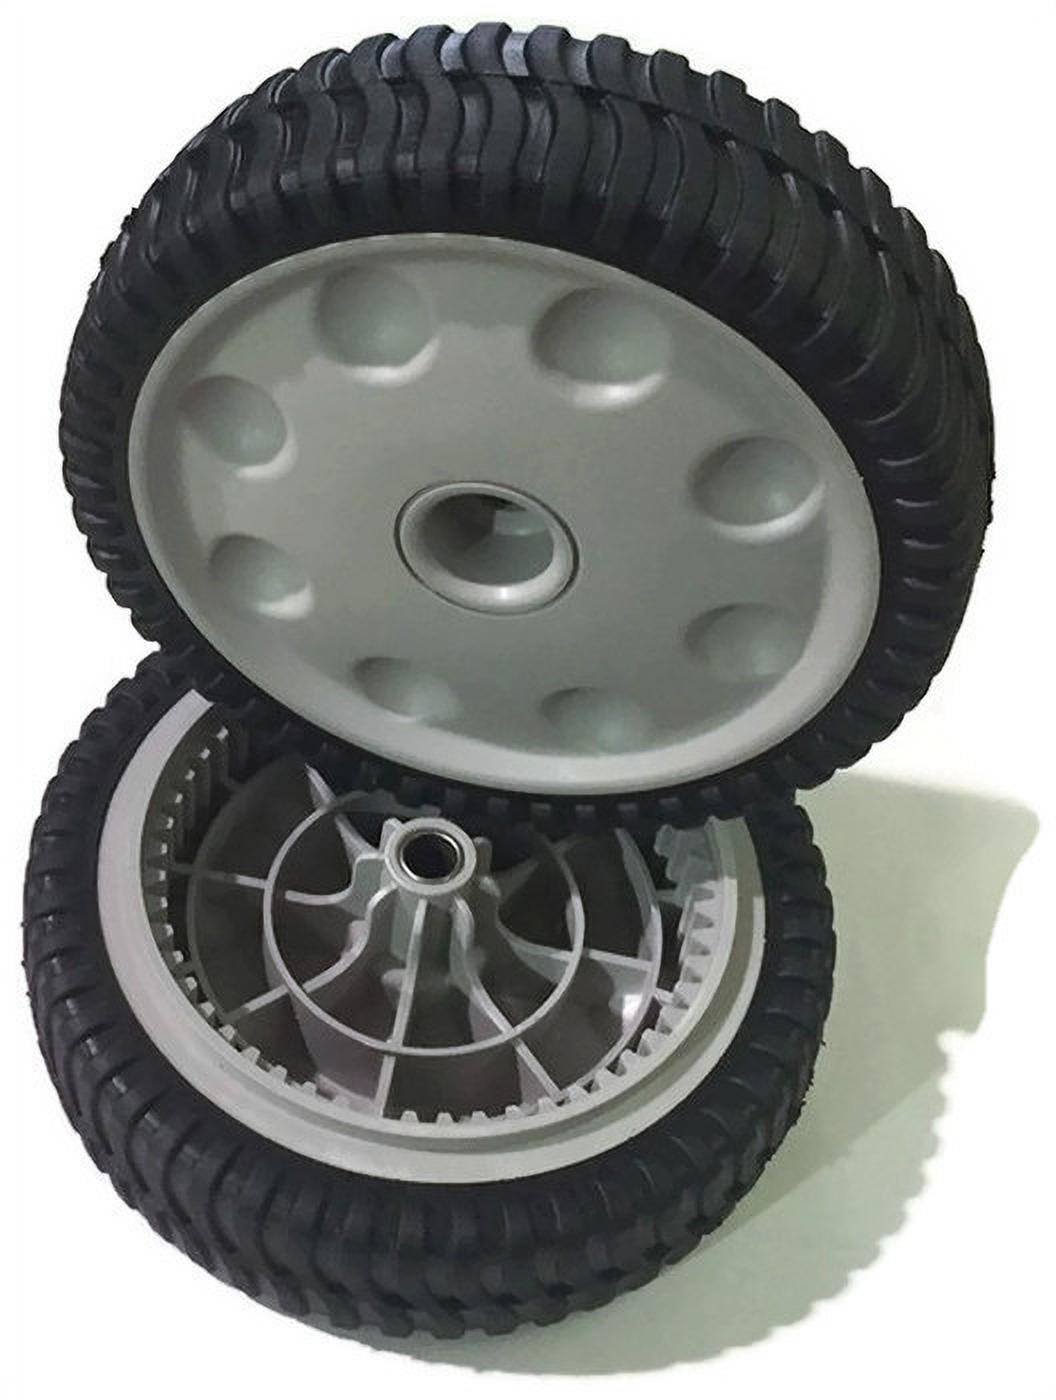 2 AdZzz Set of Front Drive Wheels Replace MTD Troy-Bilt Self Propelled Mowers for 734-04018C,734-04018B 734-04018A 